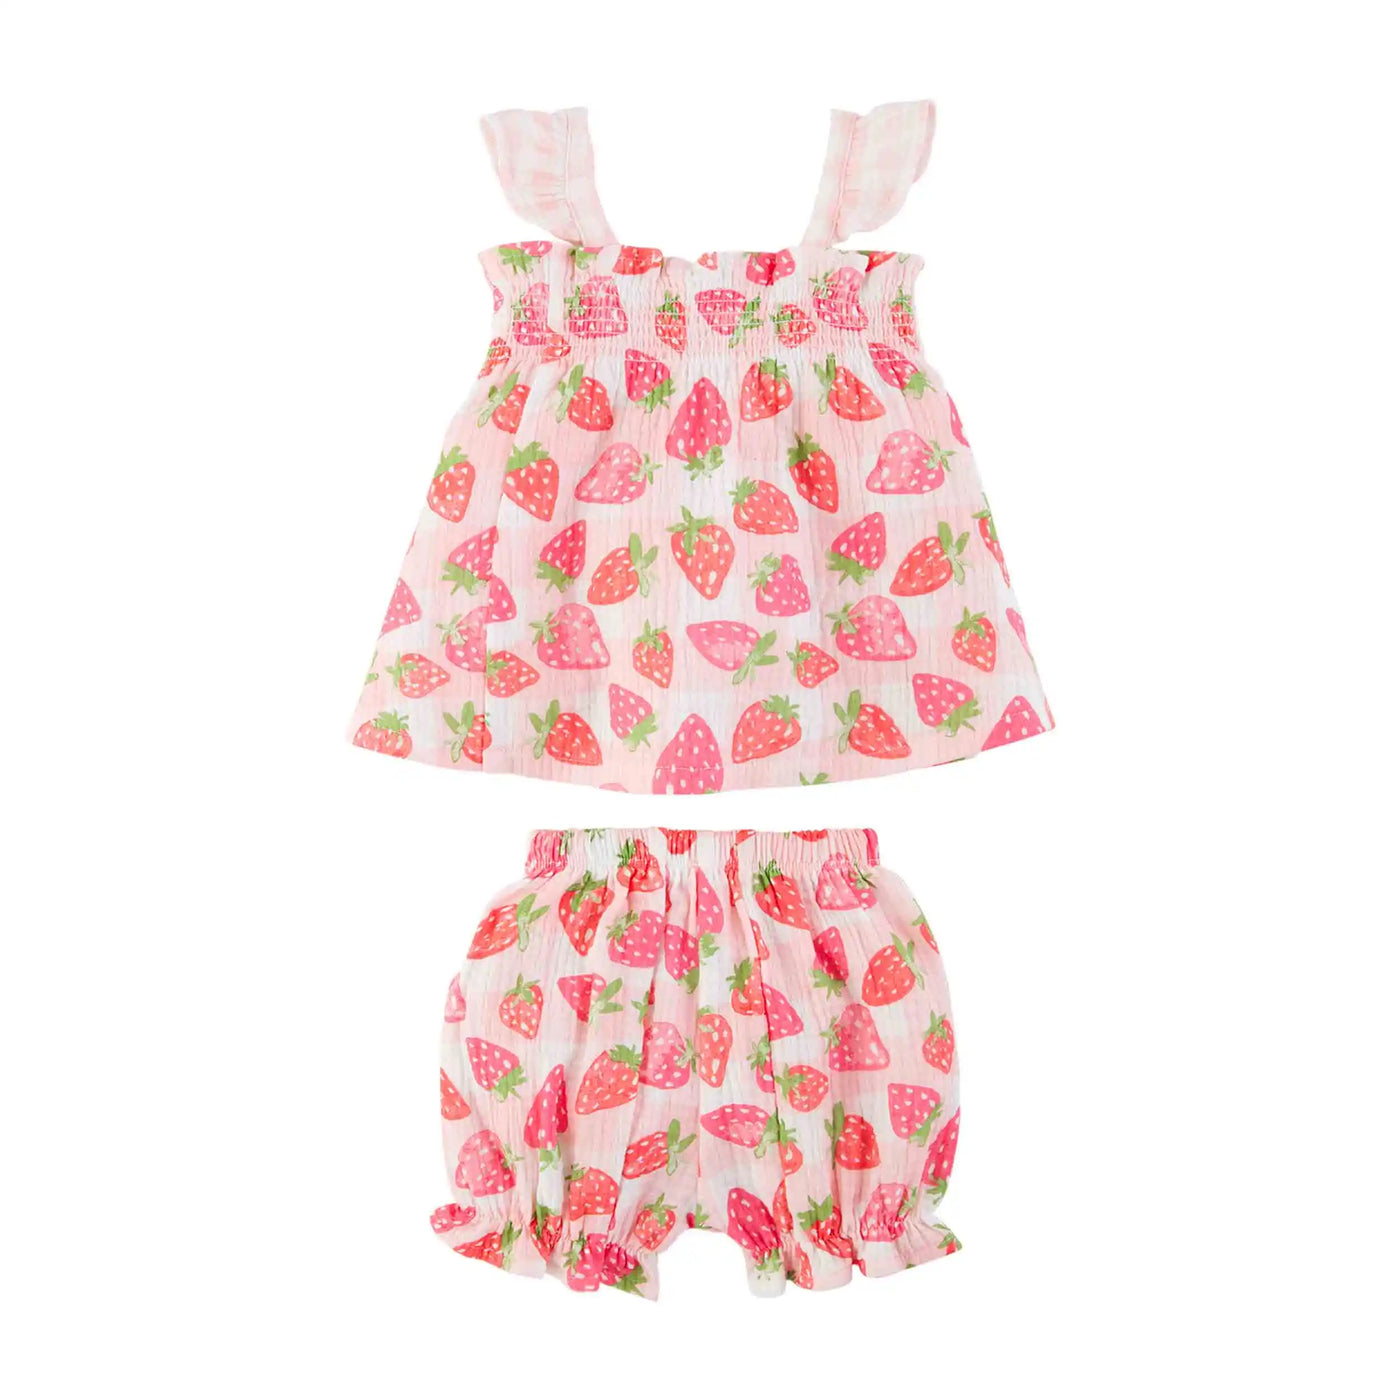 Strawberry Toddler Short Set for Girls BY MUD PIE